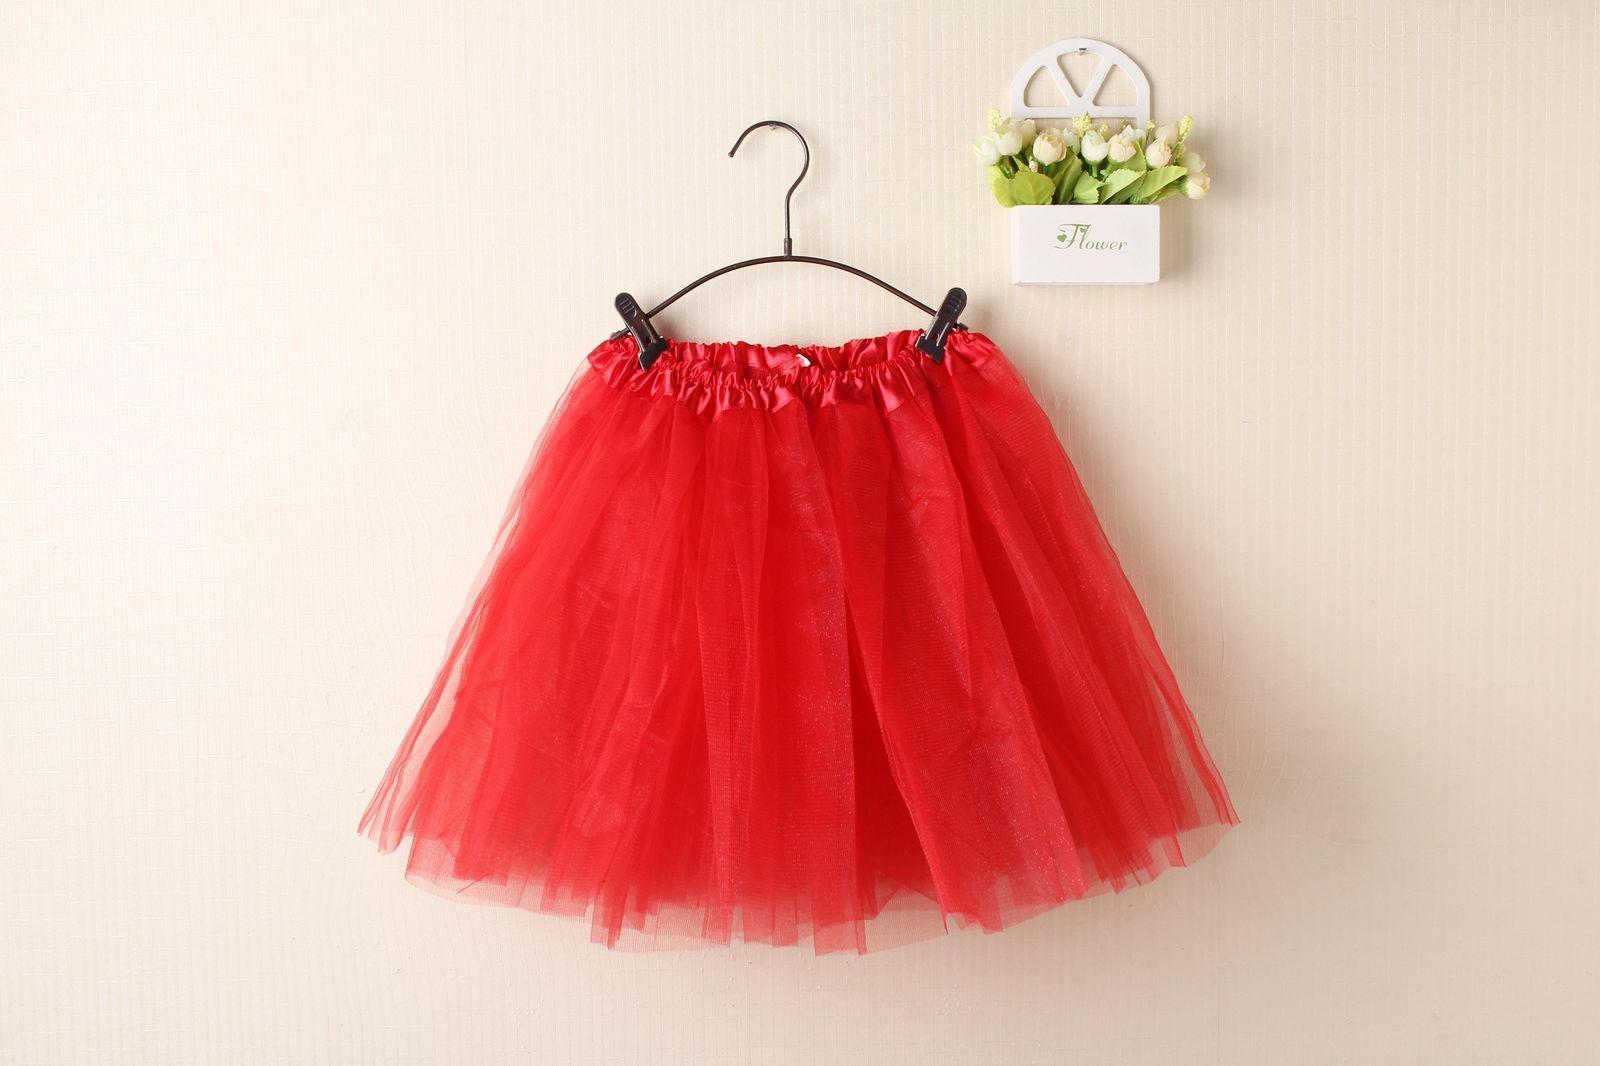 New Adults Tulle Tutu Skirt Dressup Party Costume Ballet Womens Girls Dance Wear - Red (Size: Kids)